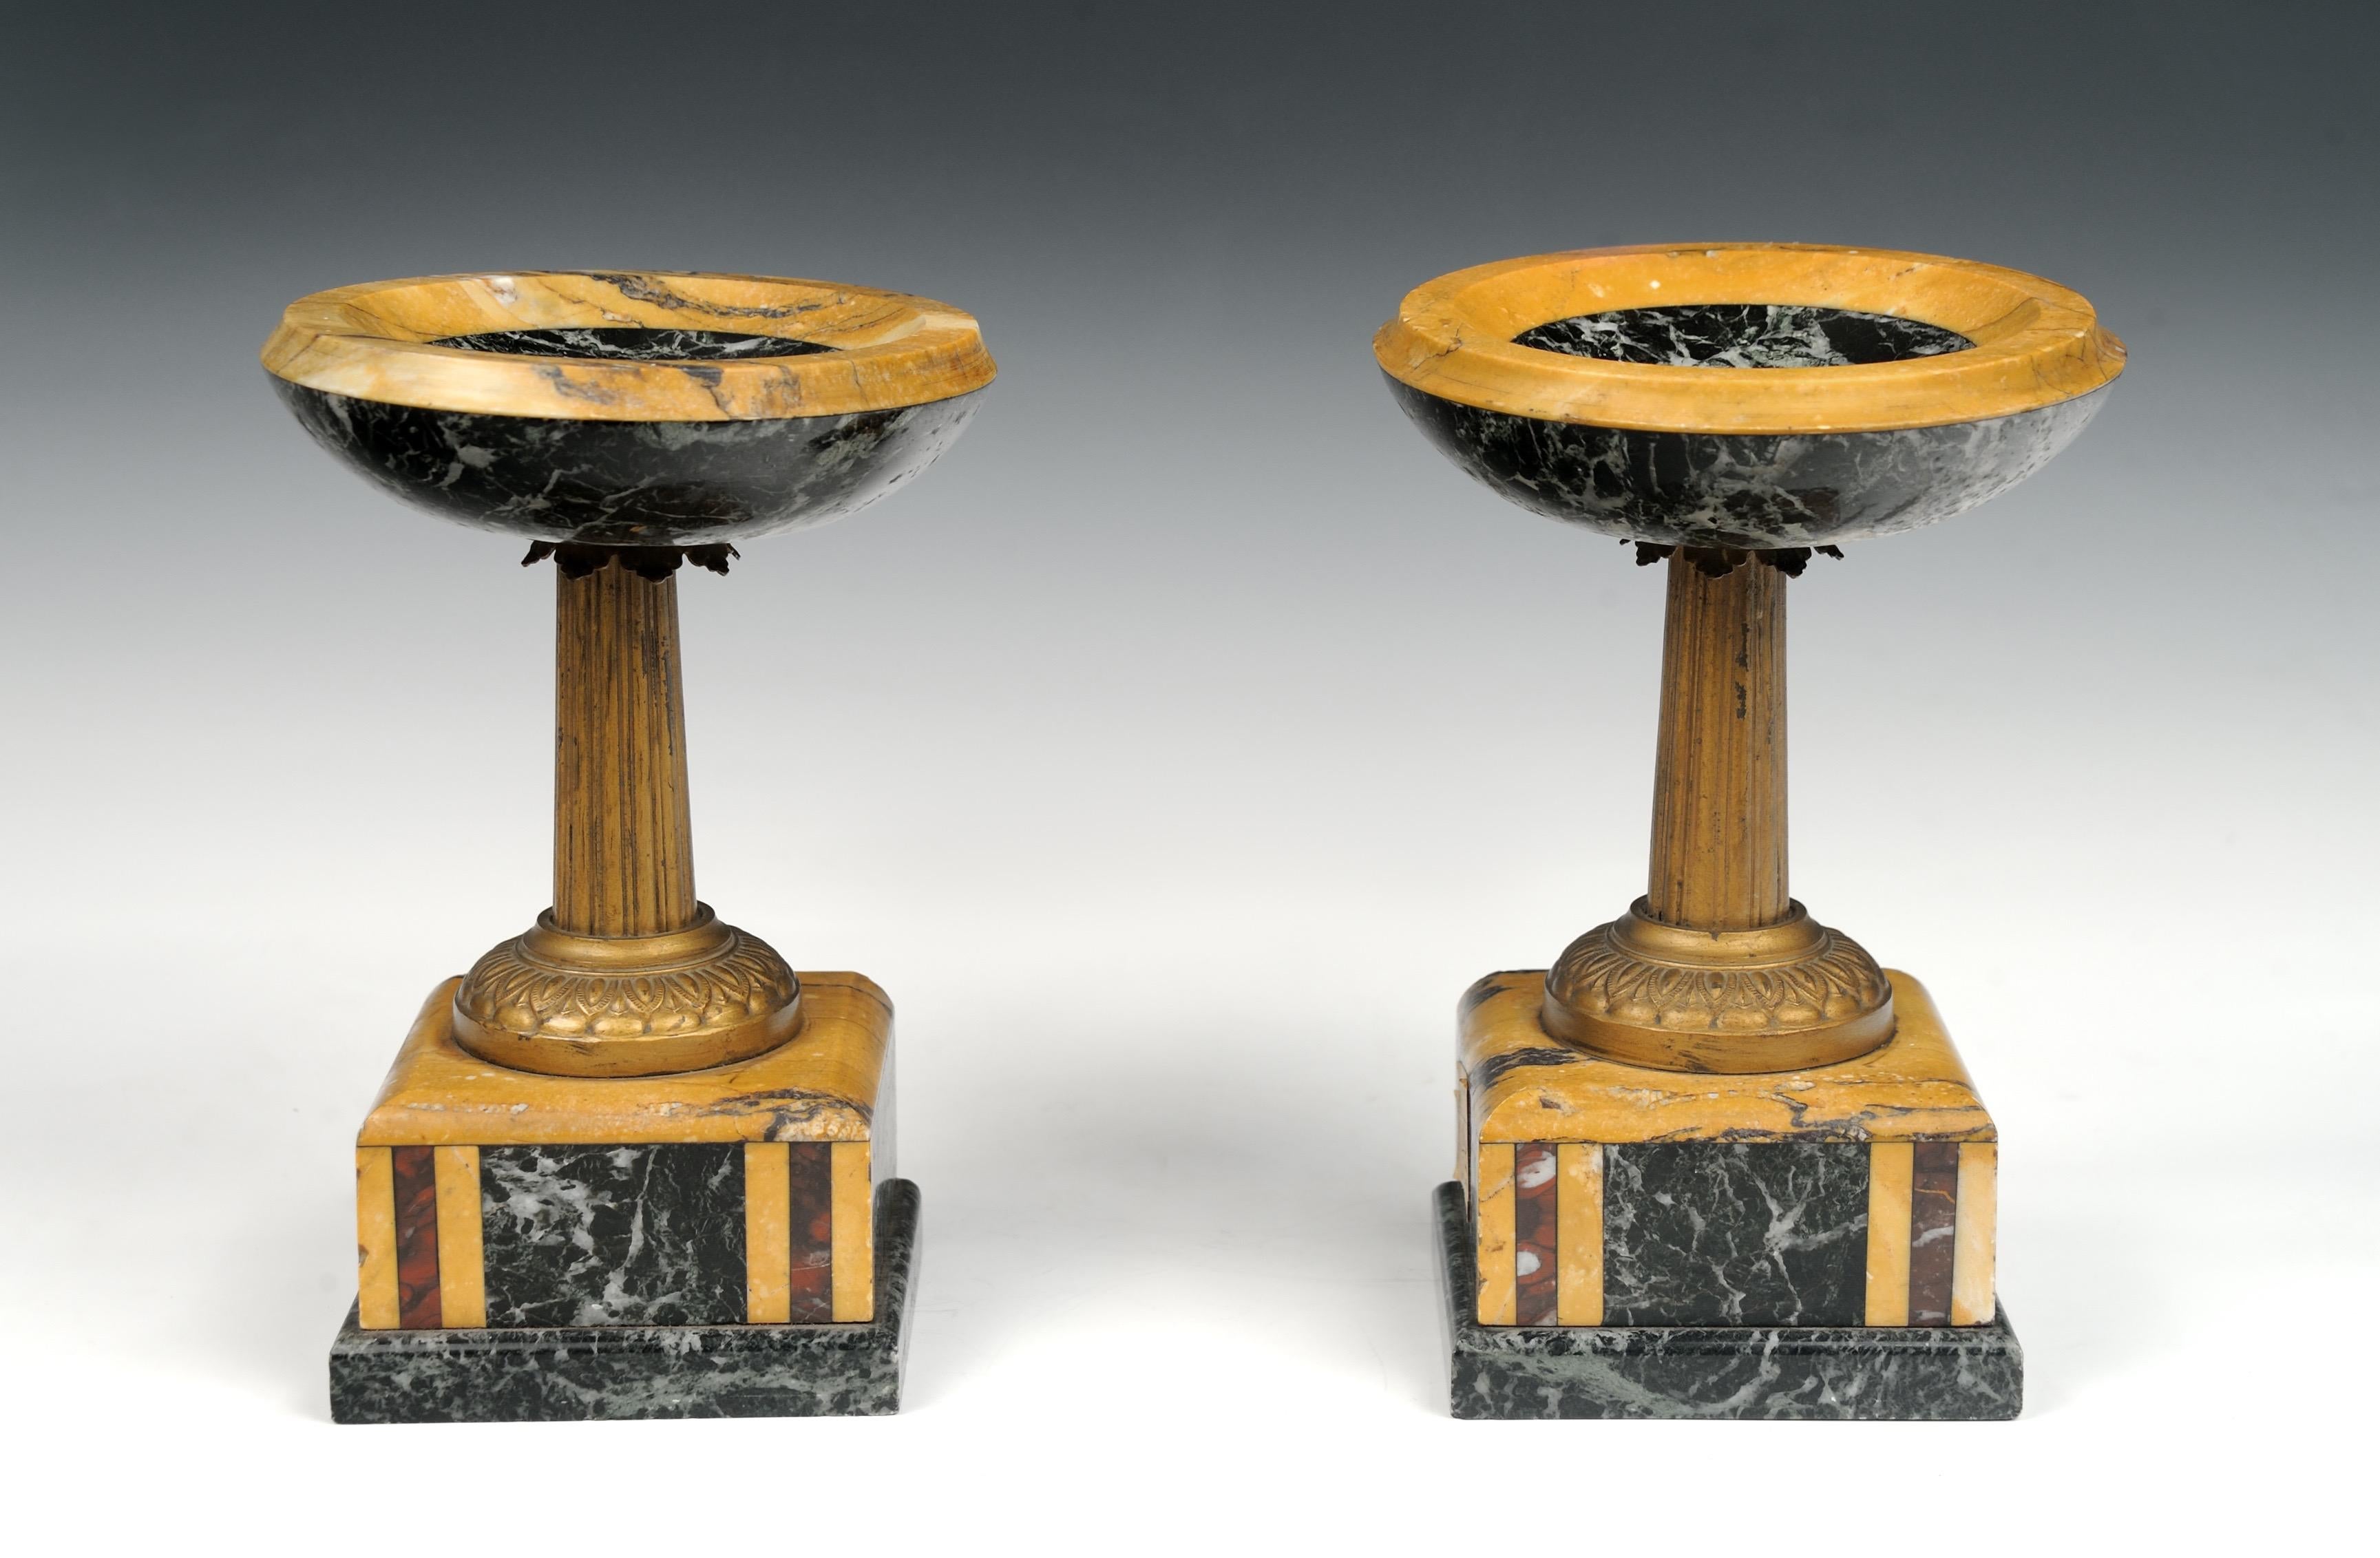 19th century pair of French marble garniture tazzas compotes, circa 1875
marble and bronze
Dimensions: 8.3